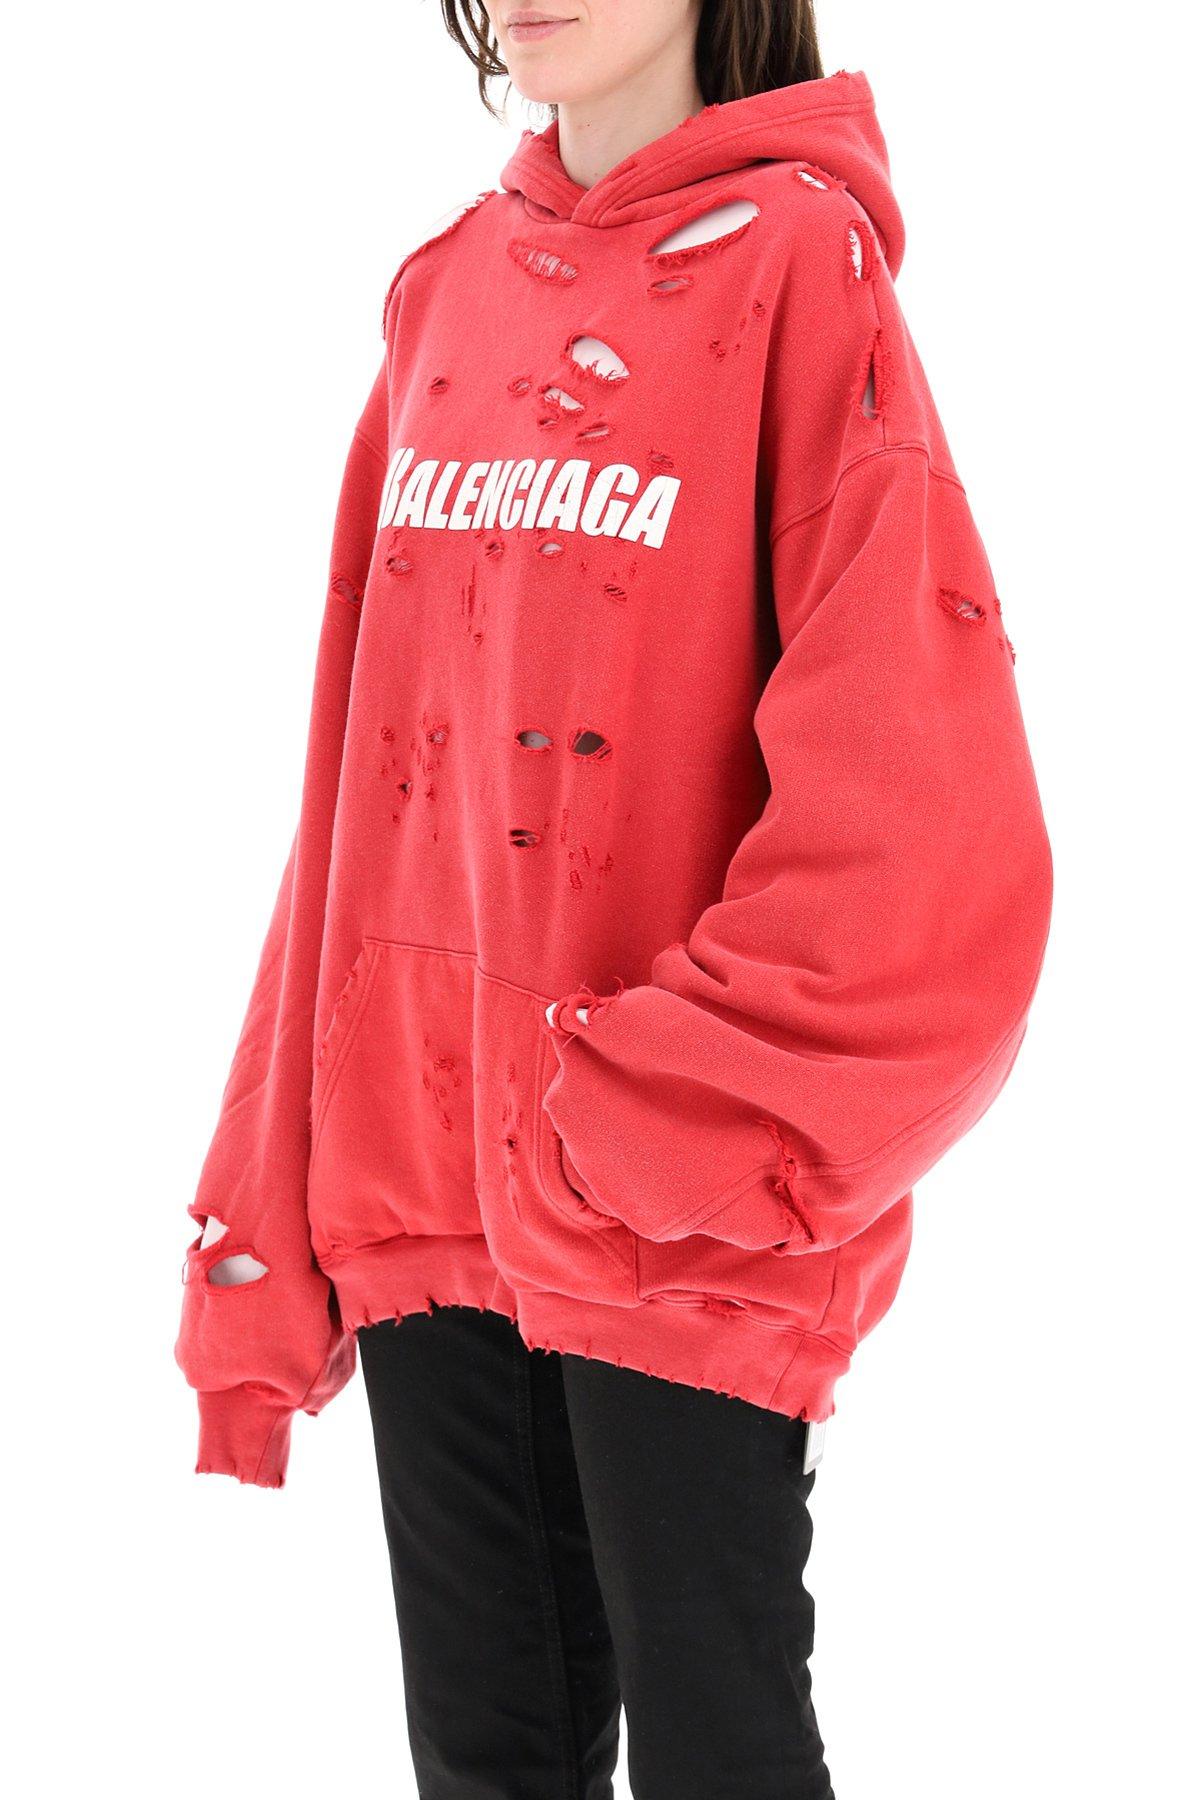 Balenciaga Destroyed Caps Hoodie in Red | Lyst